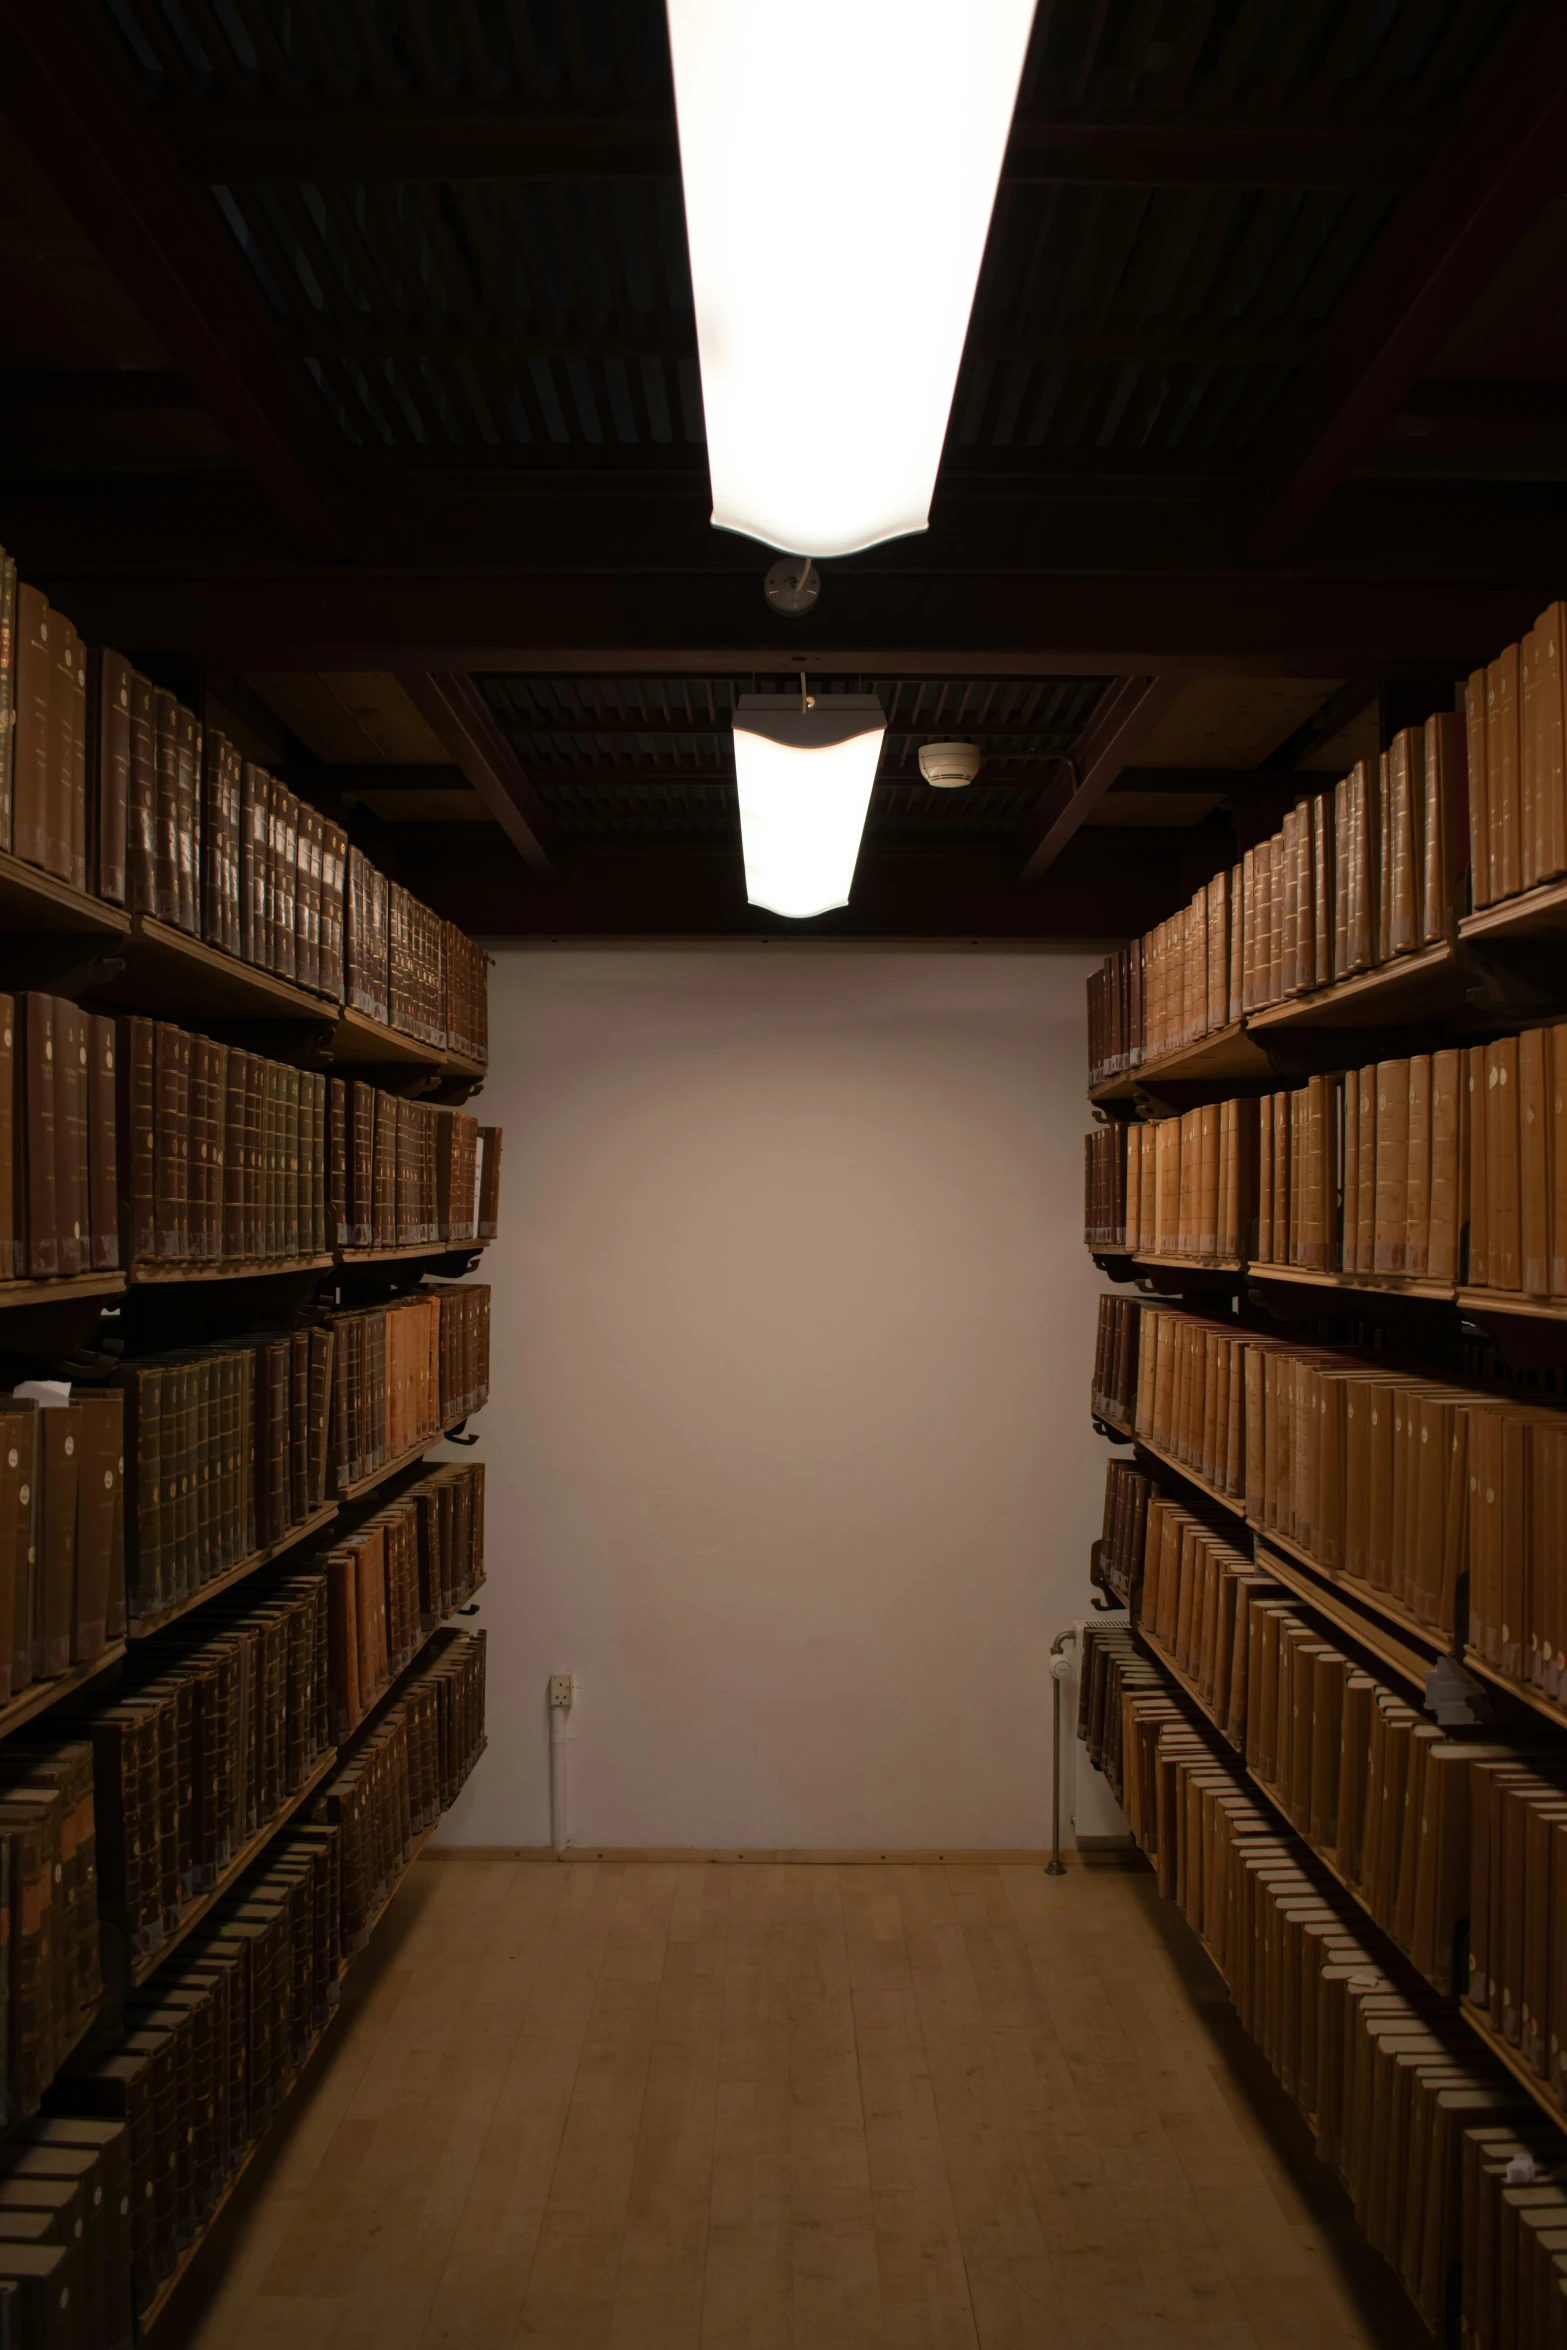 a very large bookcase is shown with many books